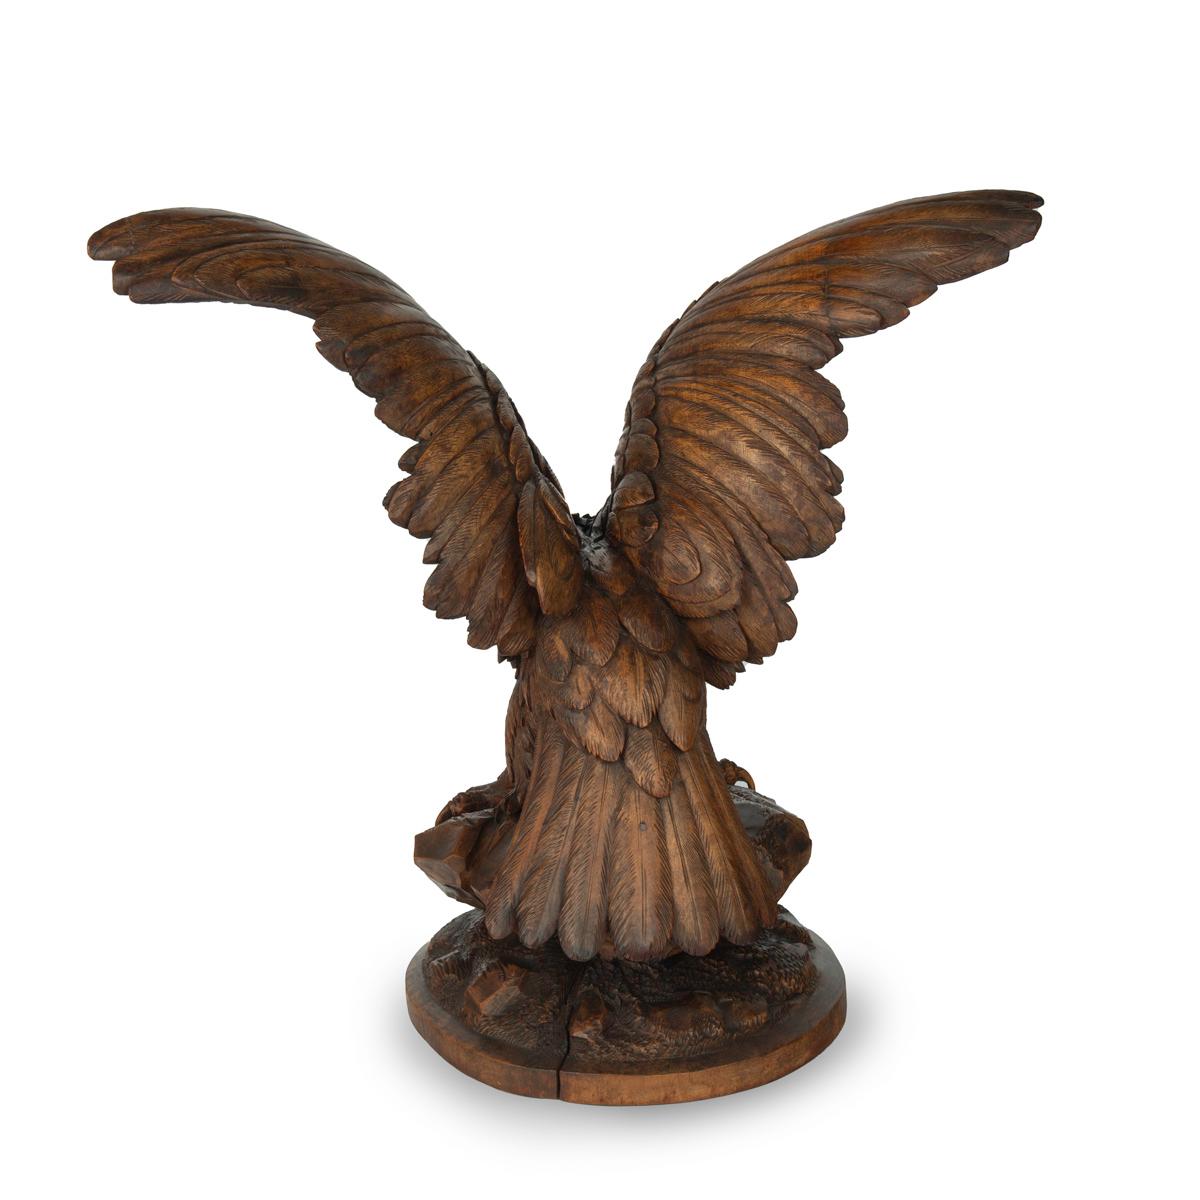 A large Black Forest walnut wooden carving of an eagle, perched on a fall of rocks, crouching down with wings outspread and the head turned to the left, with black stained detailing on the feathers and  inset glass eyes.  Swiss, circa 1890.

Please